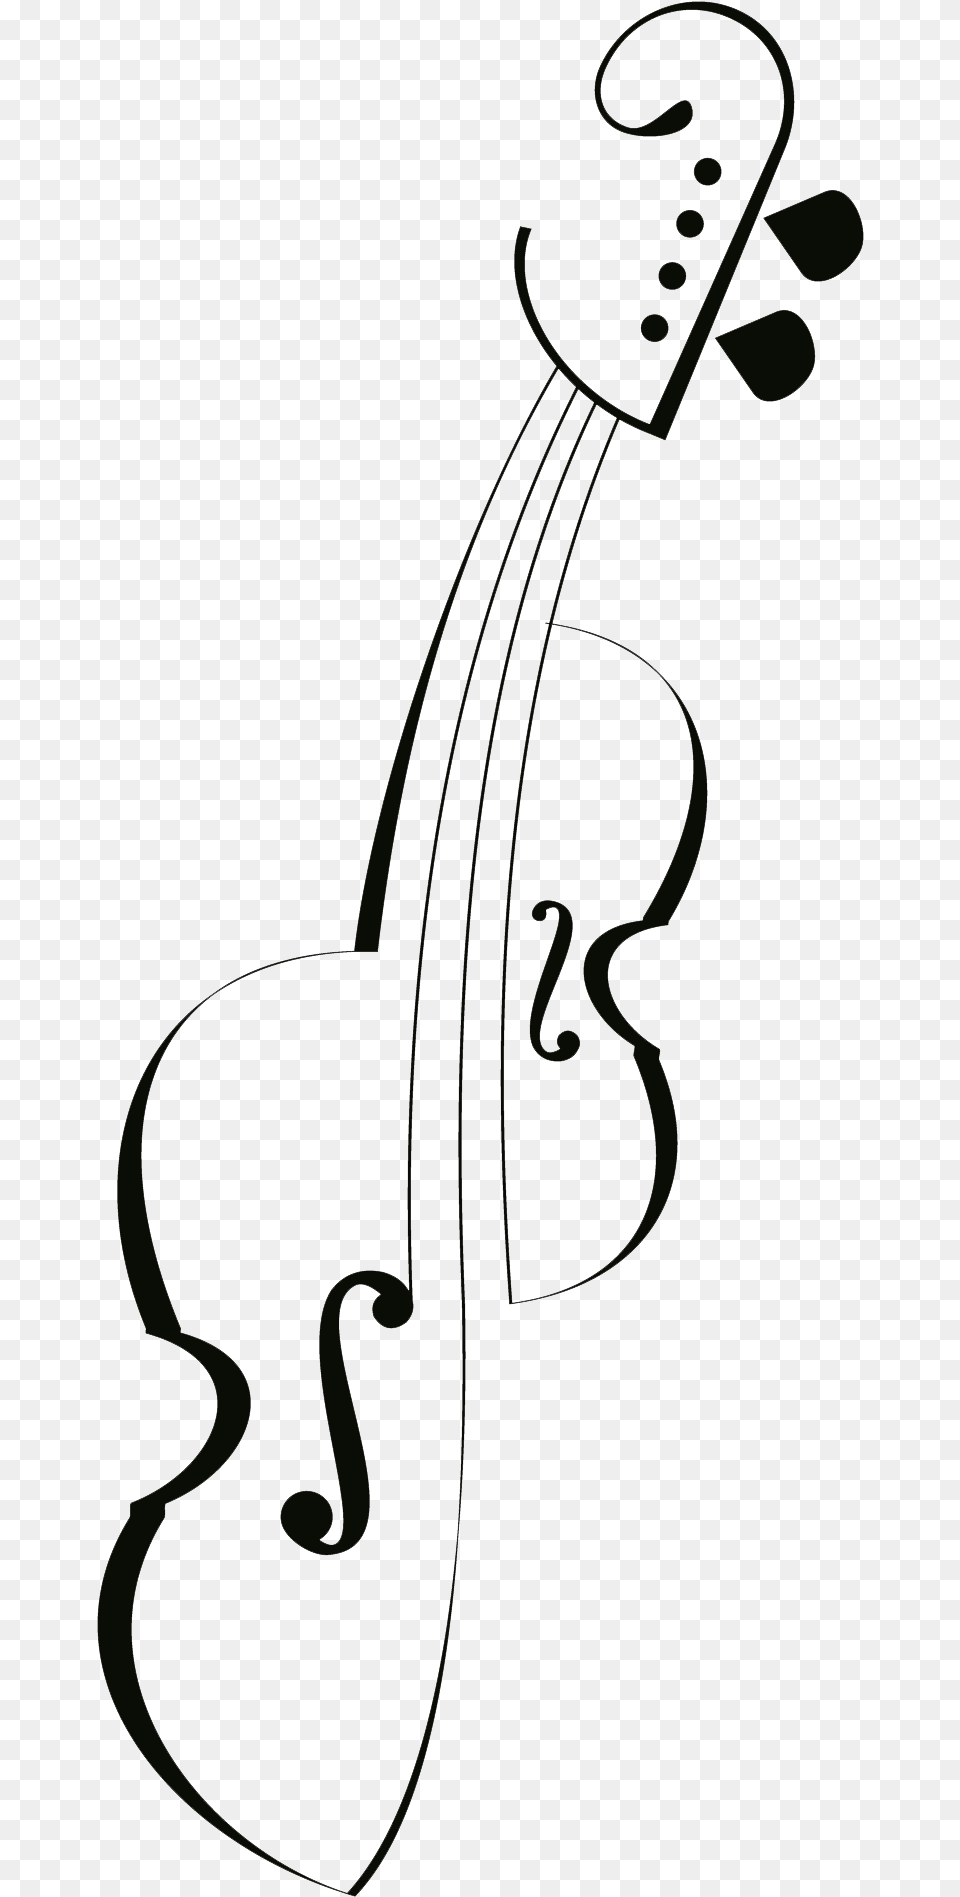 Music Tattoo Drawing Clef Violin Tattoo Designs, Musical Instrument, Cello Png